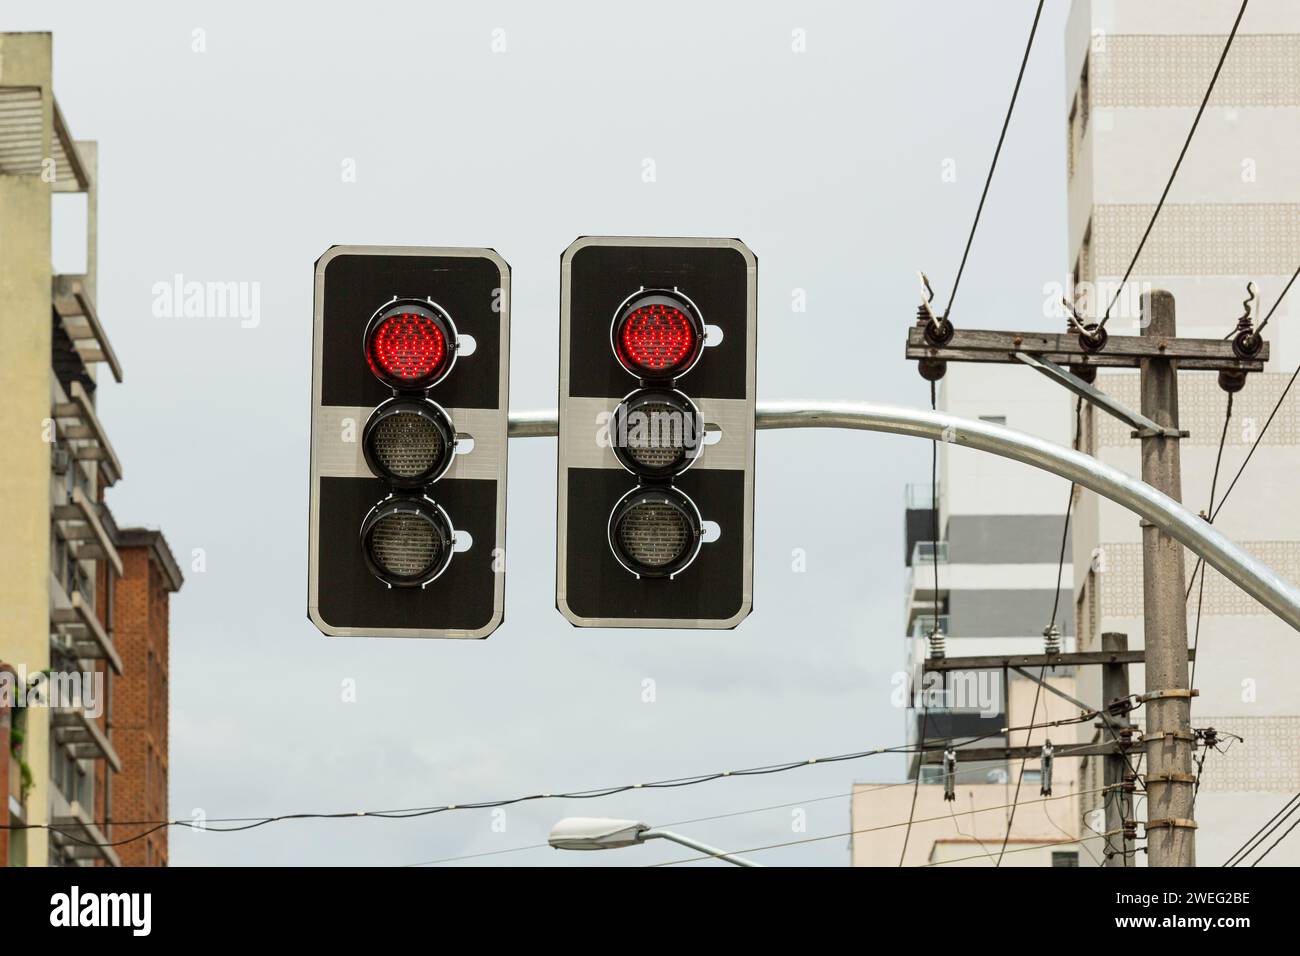 A pair of traffic lights with red lights on a cityscape background Stock Photo